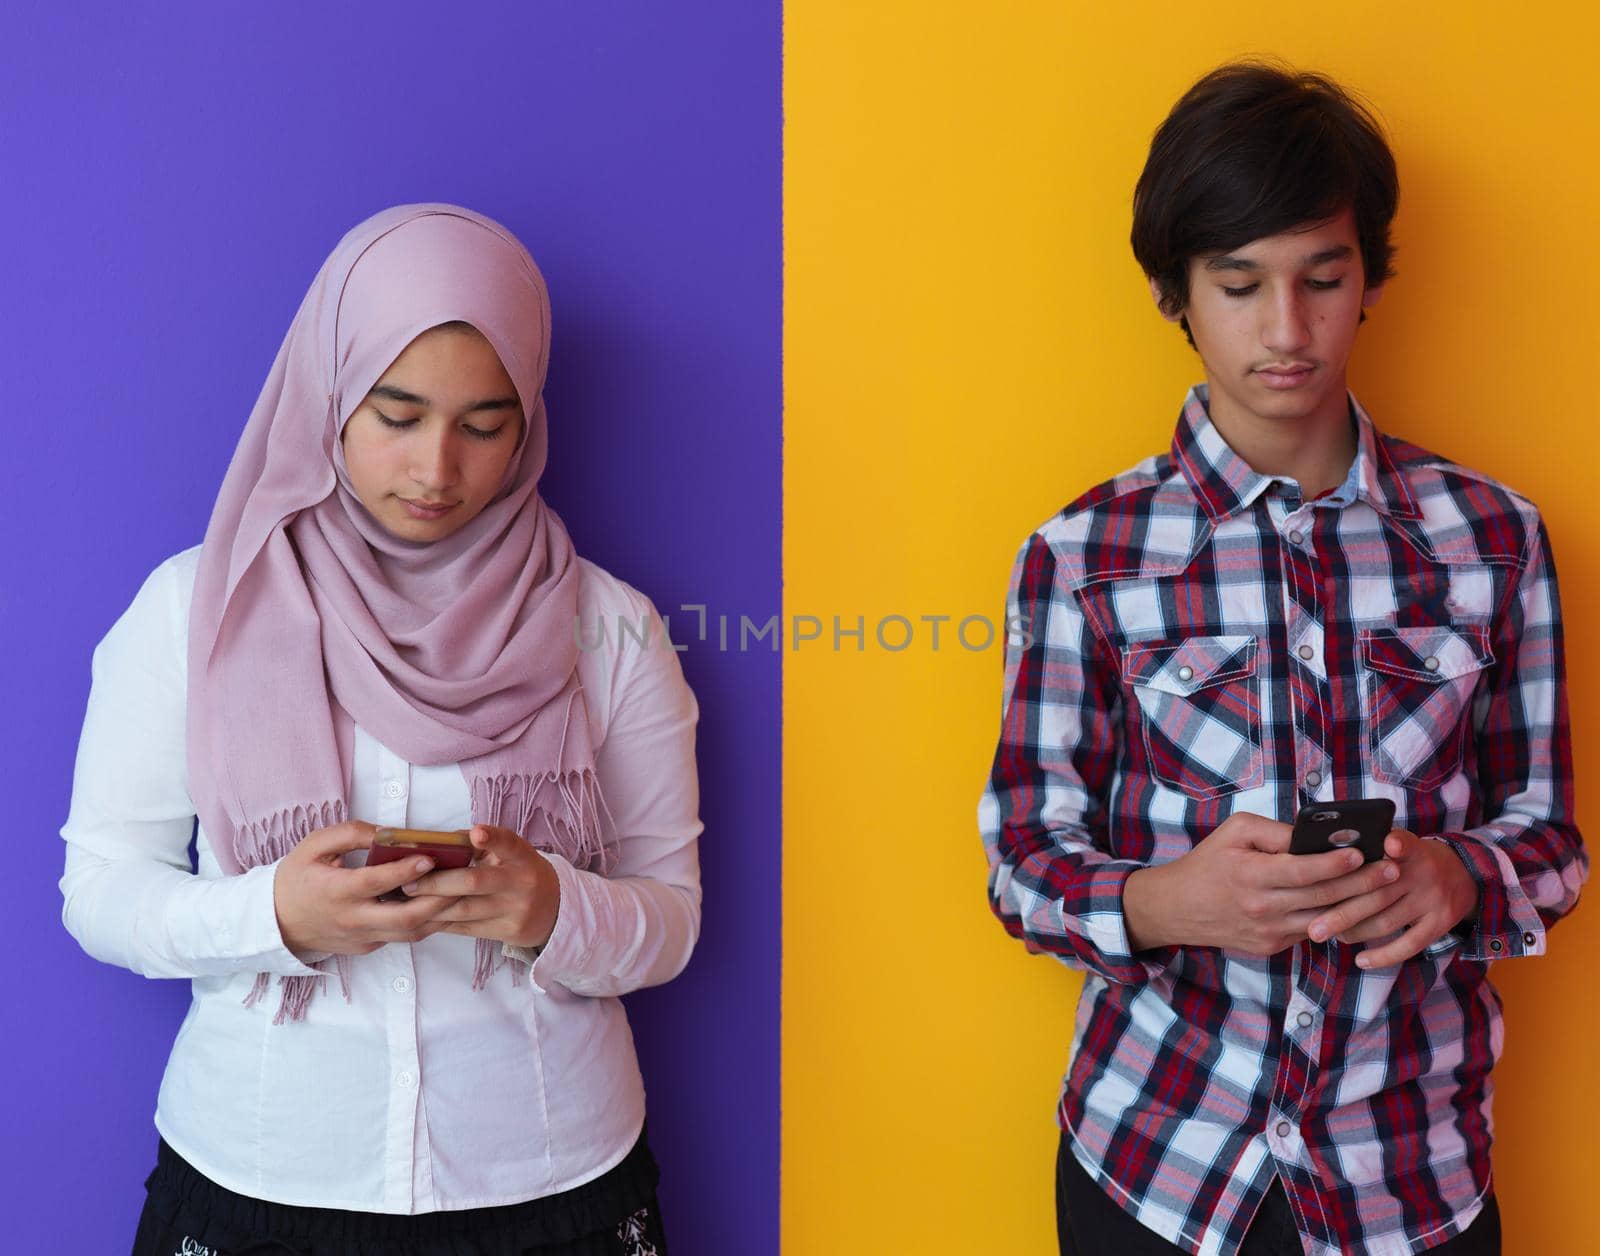 arab teenagers group using smart phones for social media networking and sharing of informations for online education